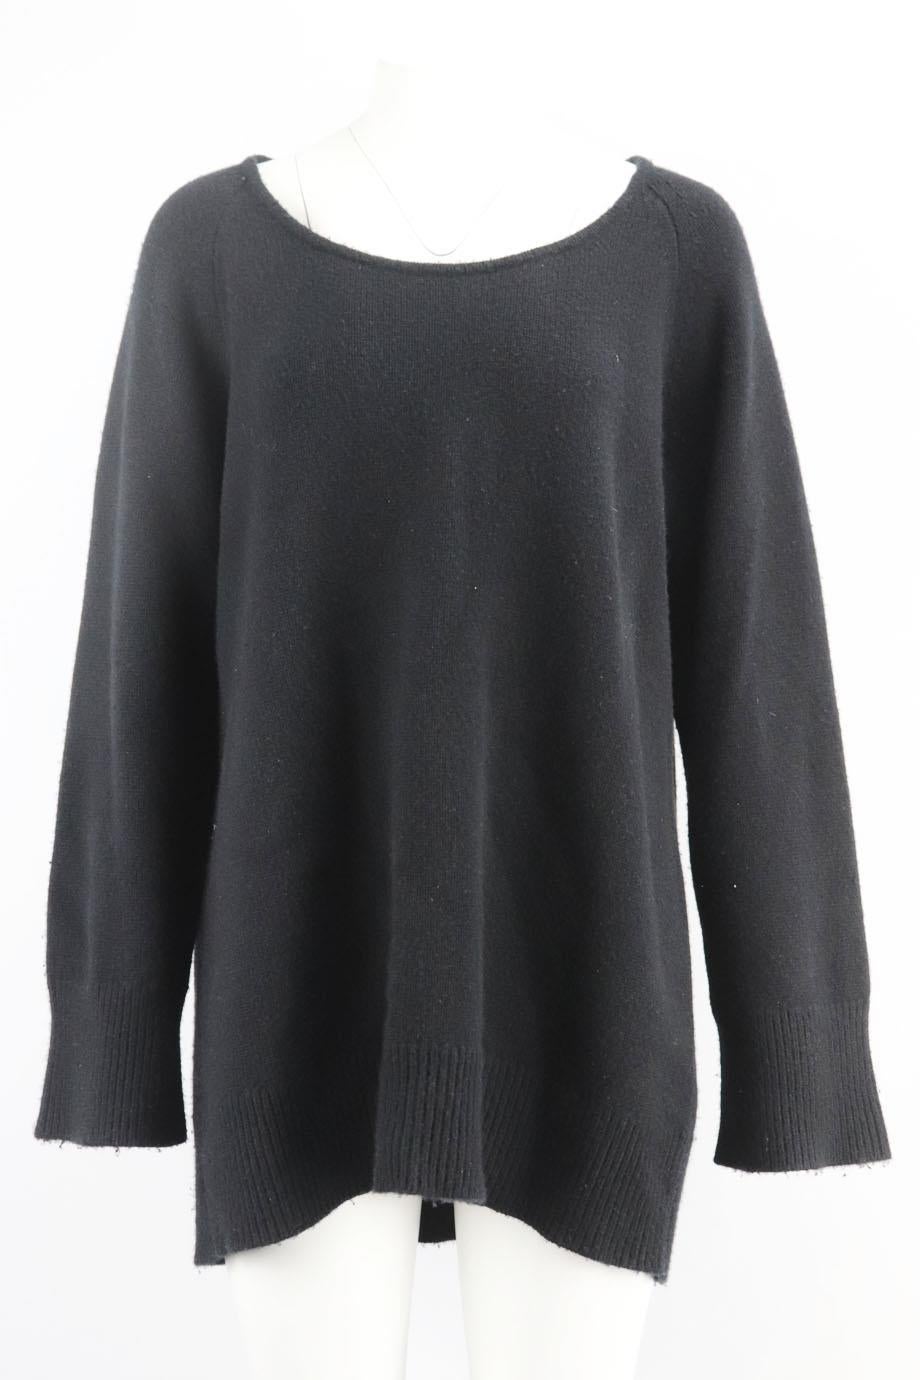 The Row cashmere sweater. Black. Long sleeve, crewneck. Slips on. 65% Wool, 35% cashmere. Size: Medium (UK 10, US 6, FR 38, IT 42). Bust: 50 in. Waist: 45 in. Hips: 50 in. Length: 31 in
